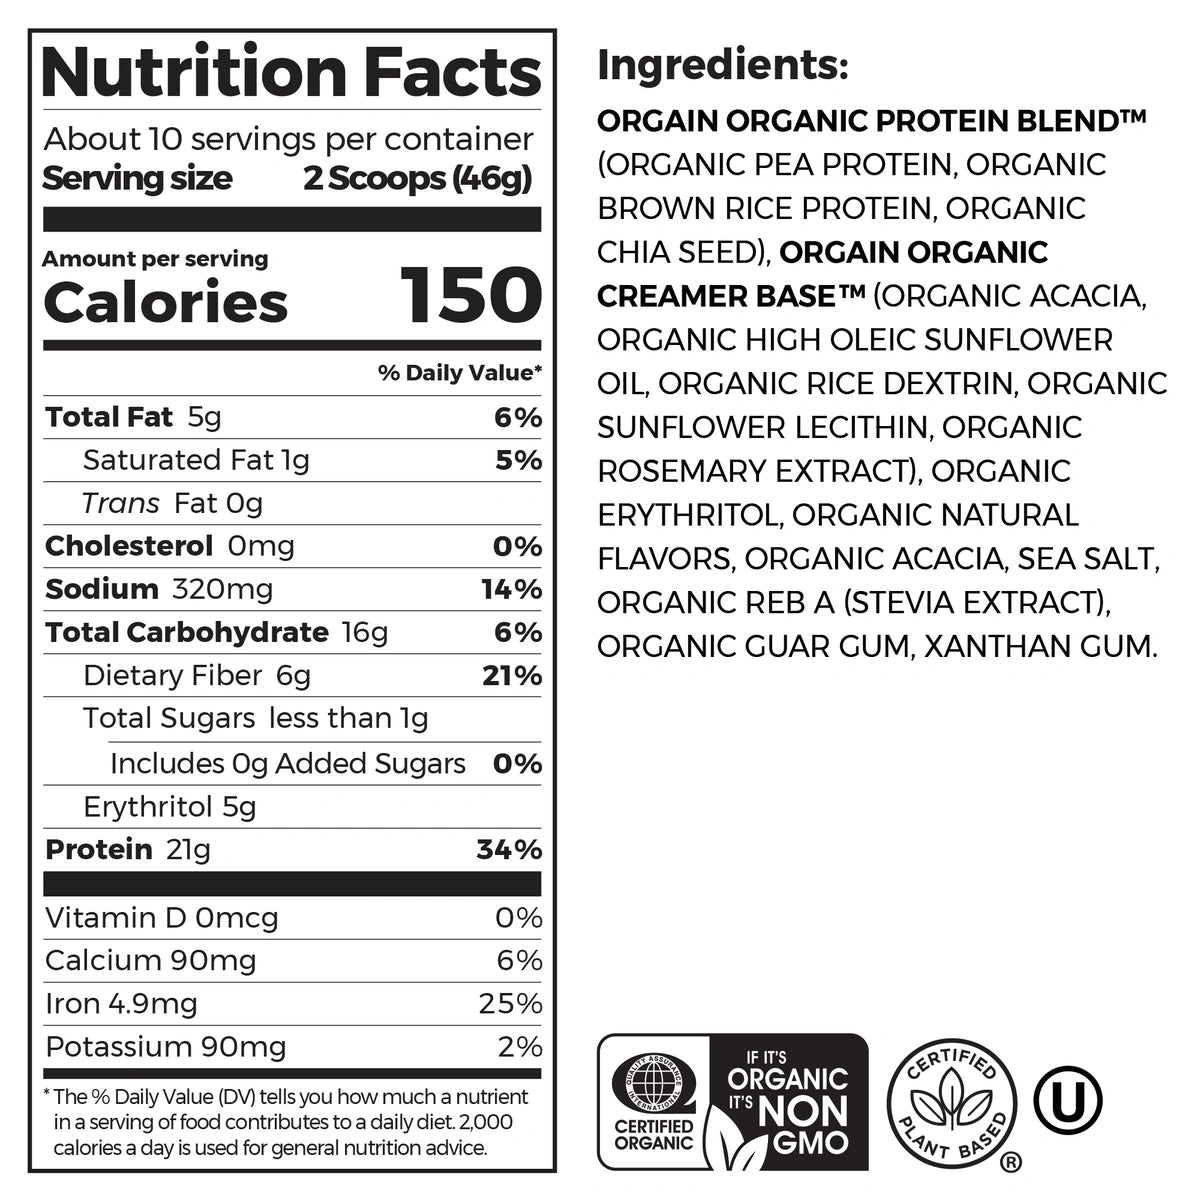 Nutrition Fact Panel and list of ingredients for Organic Protein Plant Based Protein Powder - Vanilla Bean Flavor in the 1.02lb Canister Size